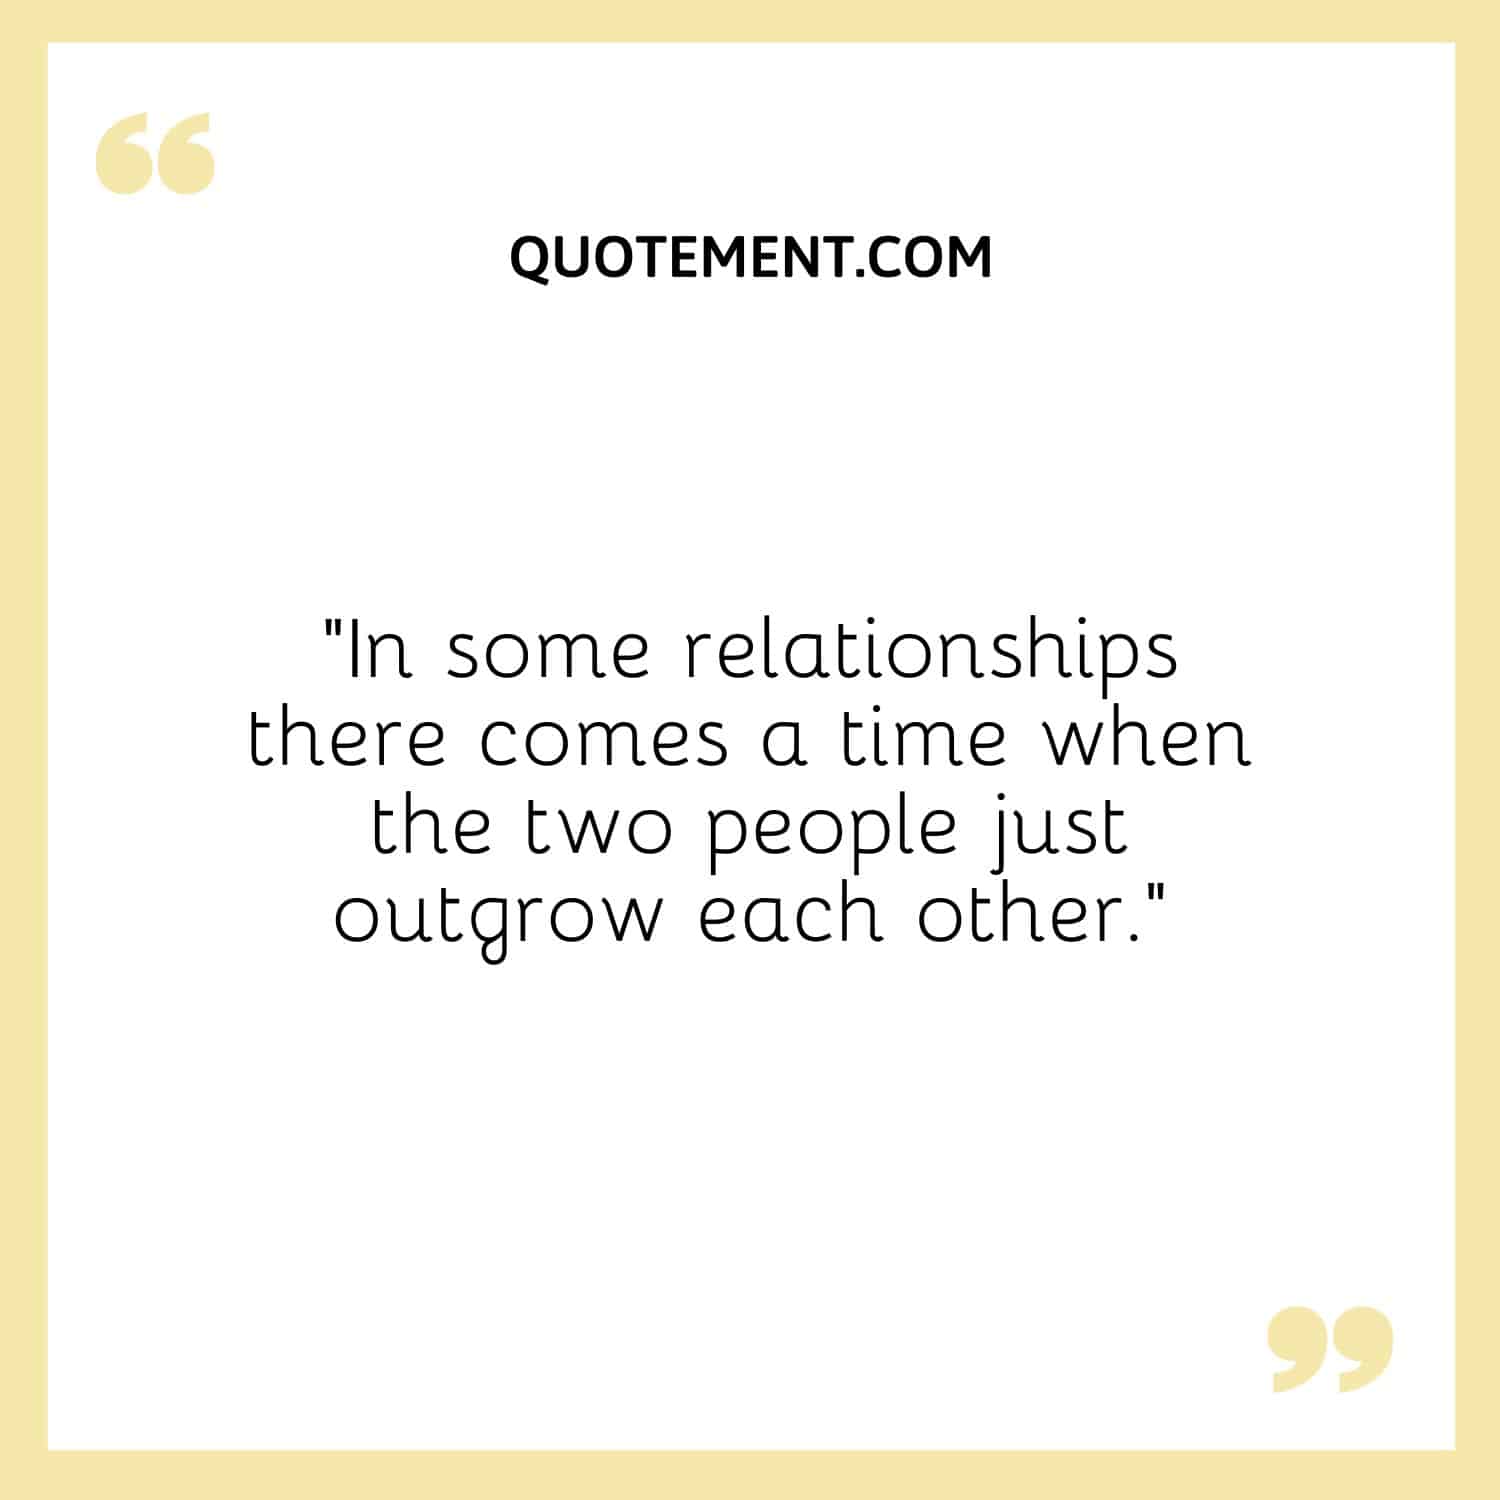 In some relationships there comes a time when the two people just outgrow each other